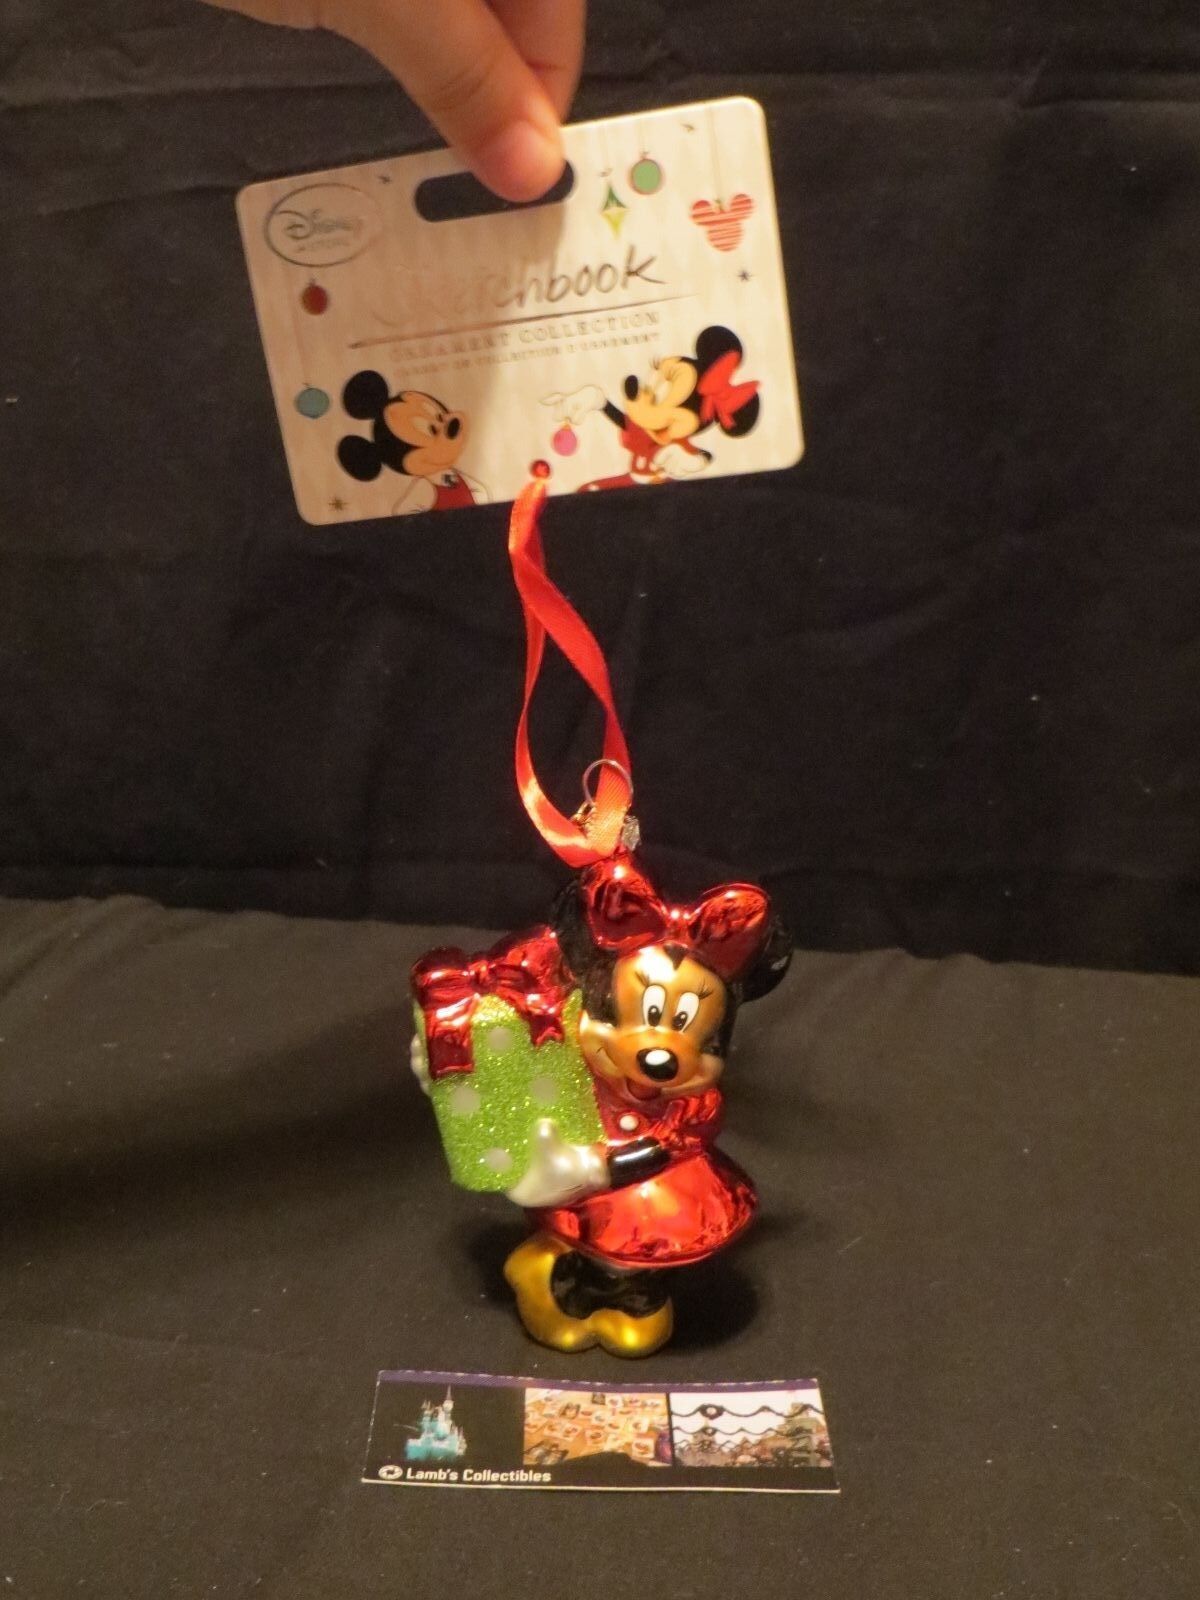 Minnie Mouse holding Christmas present Disney Store Sketchbook glass Ornament - $24.21